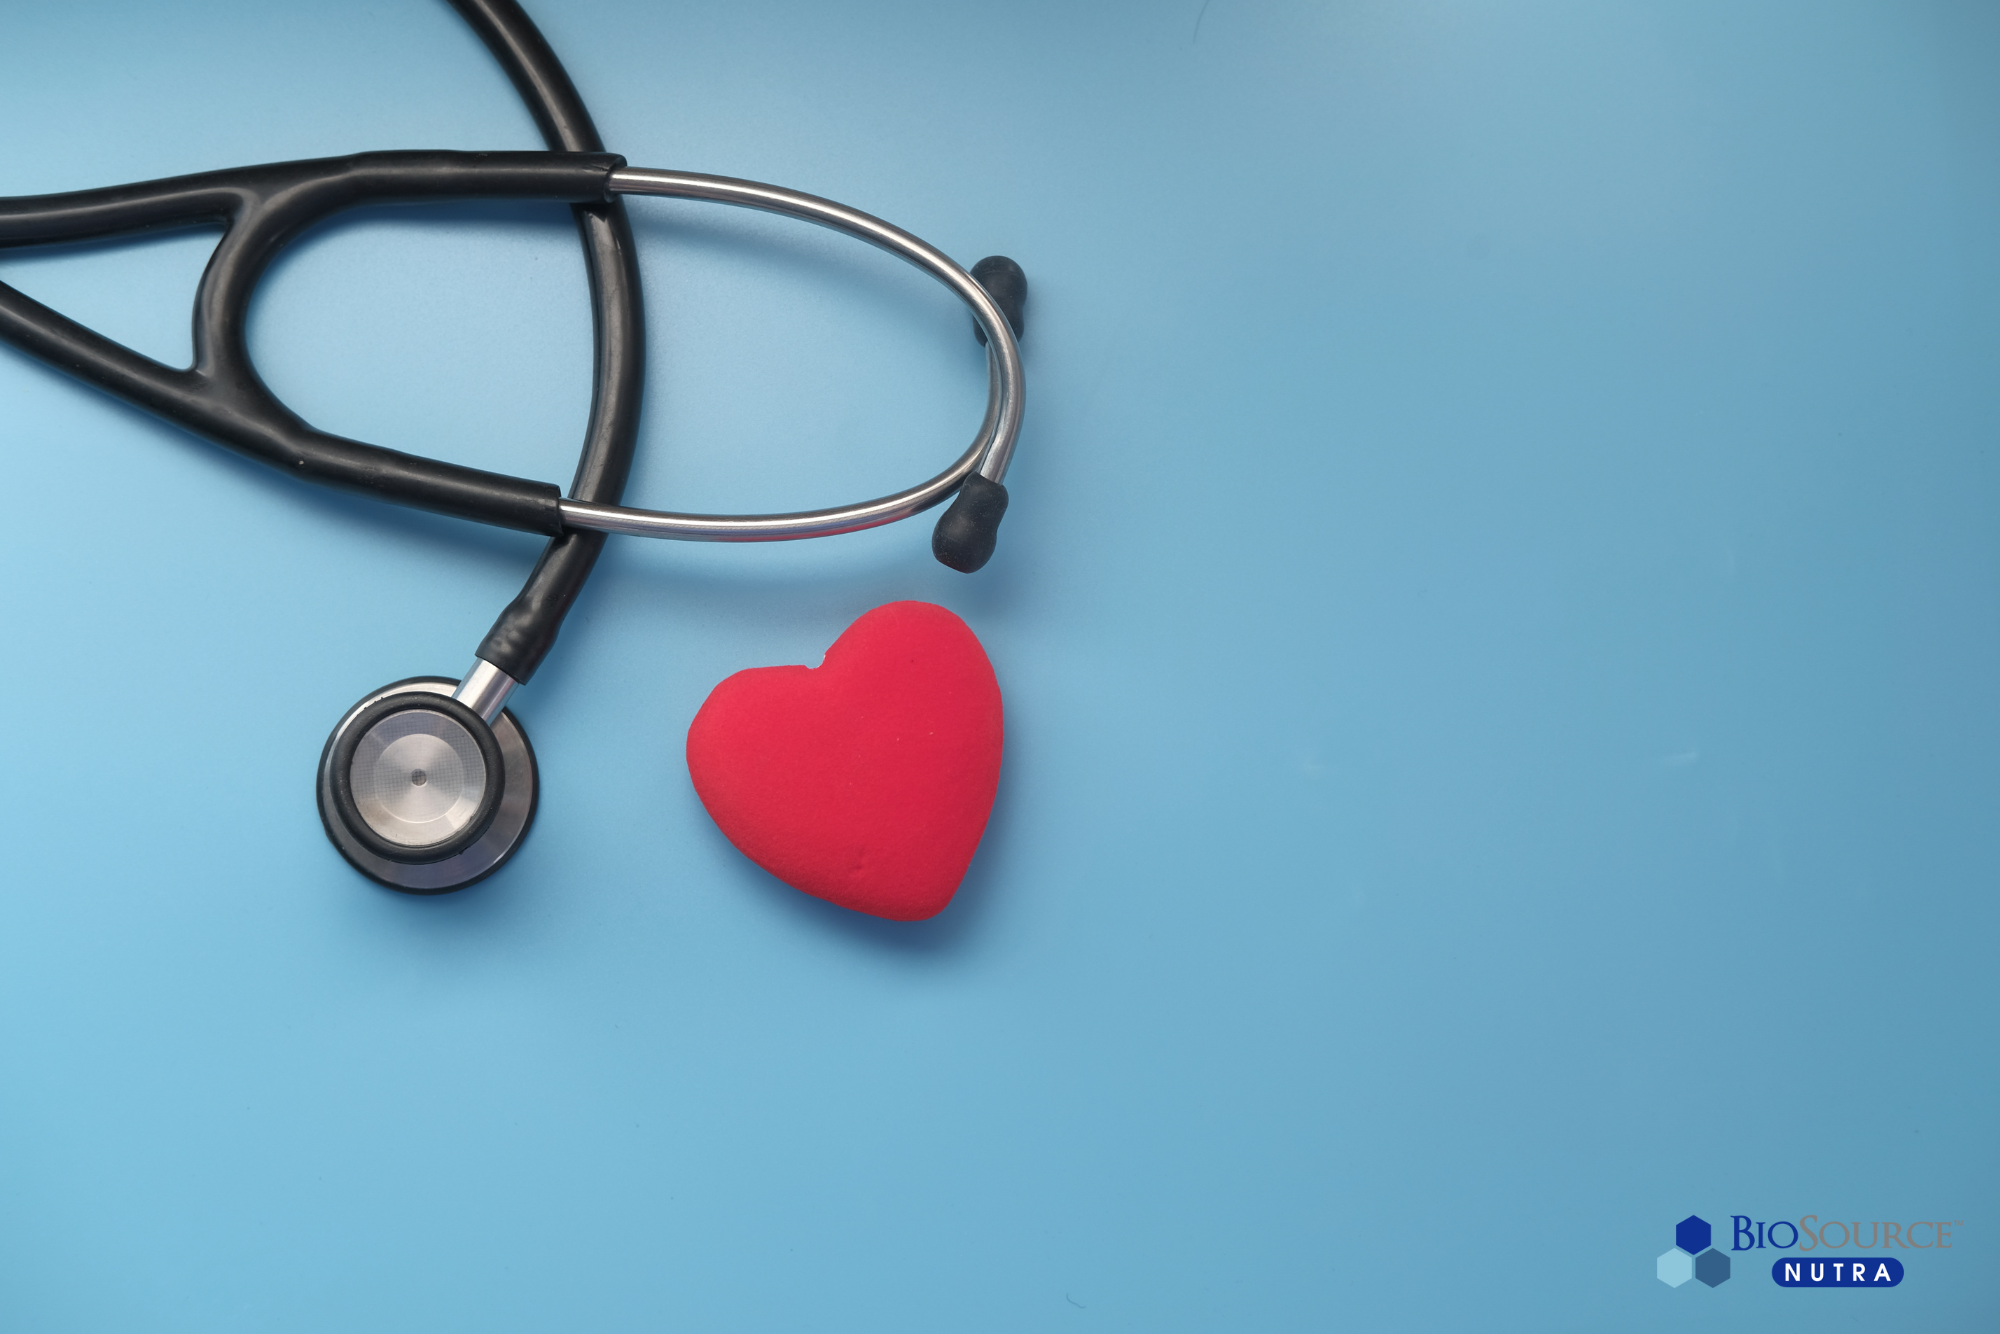 A stethoscope and a red heart